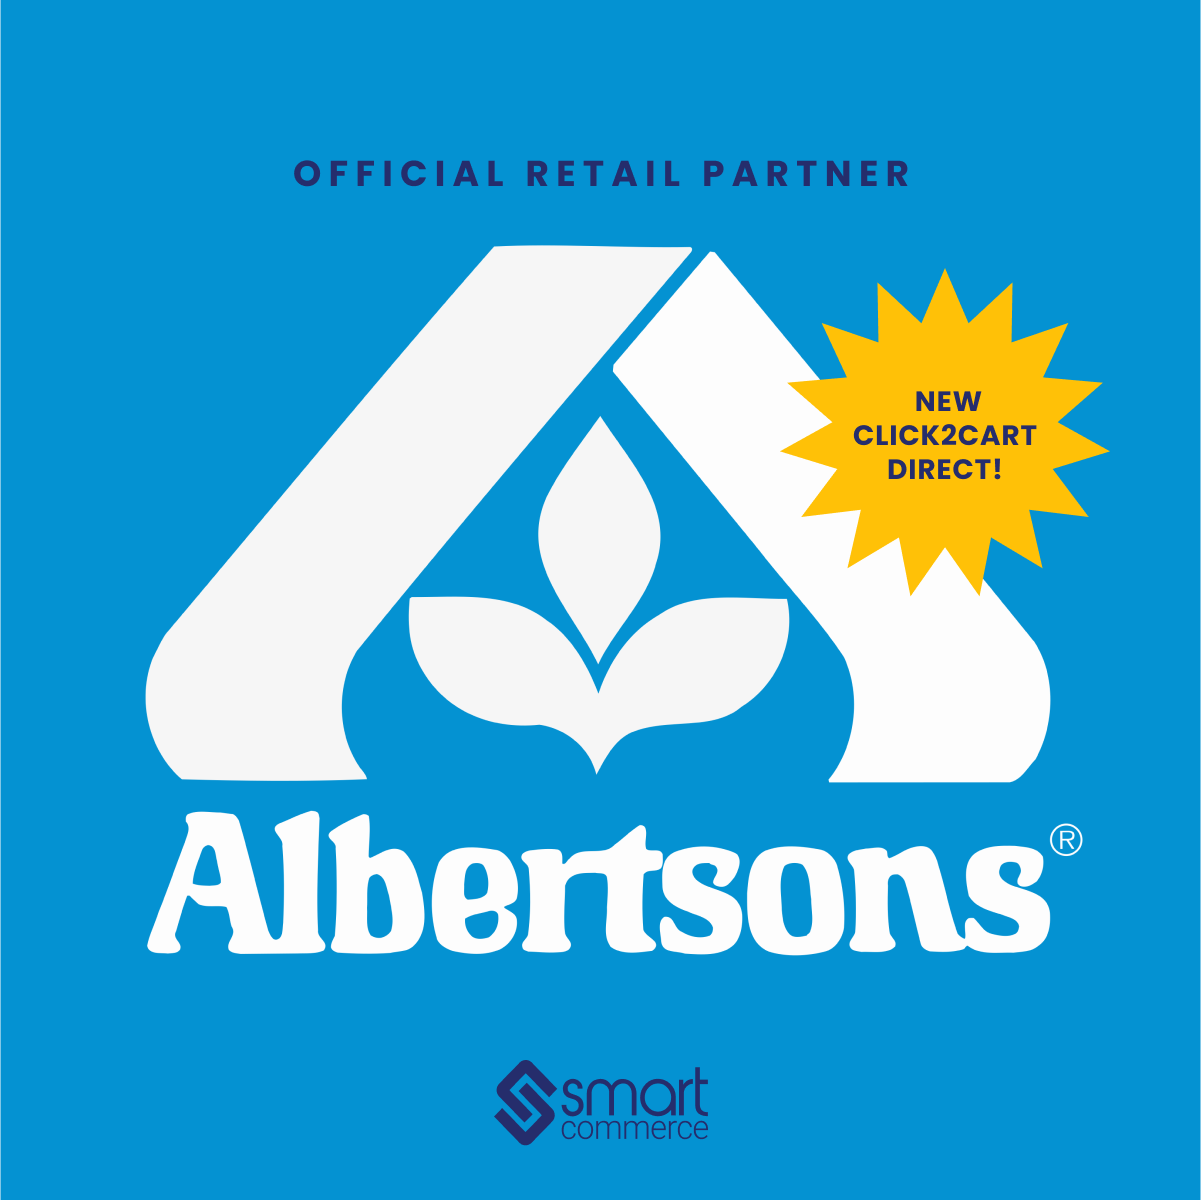 Albertsons Is Now An Official Retail Partner of SmartCommerce